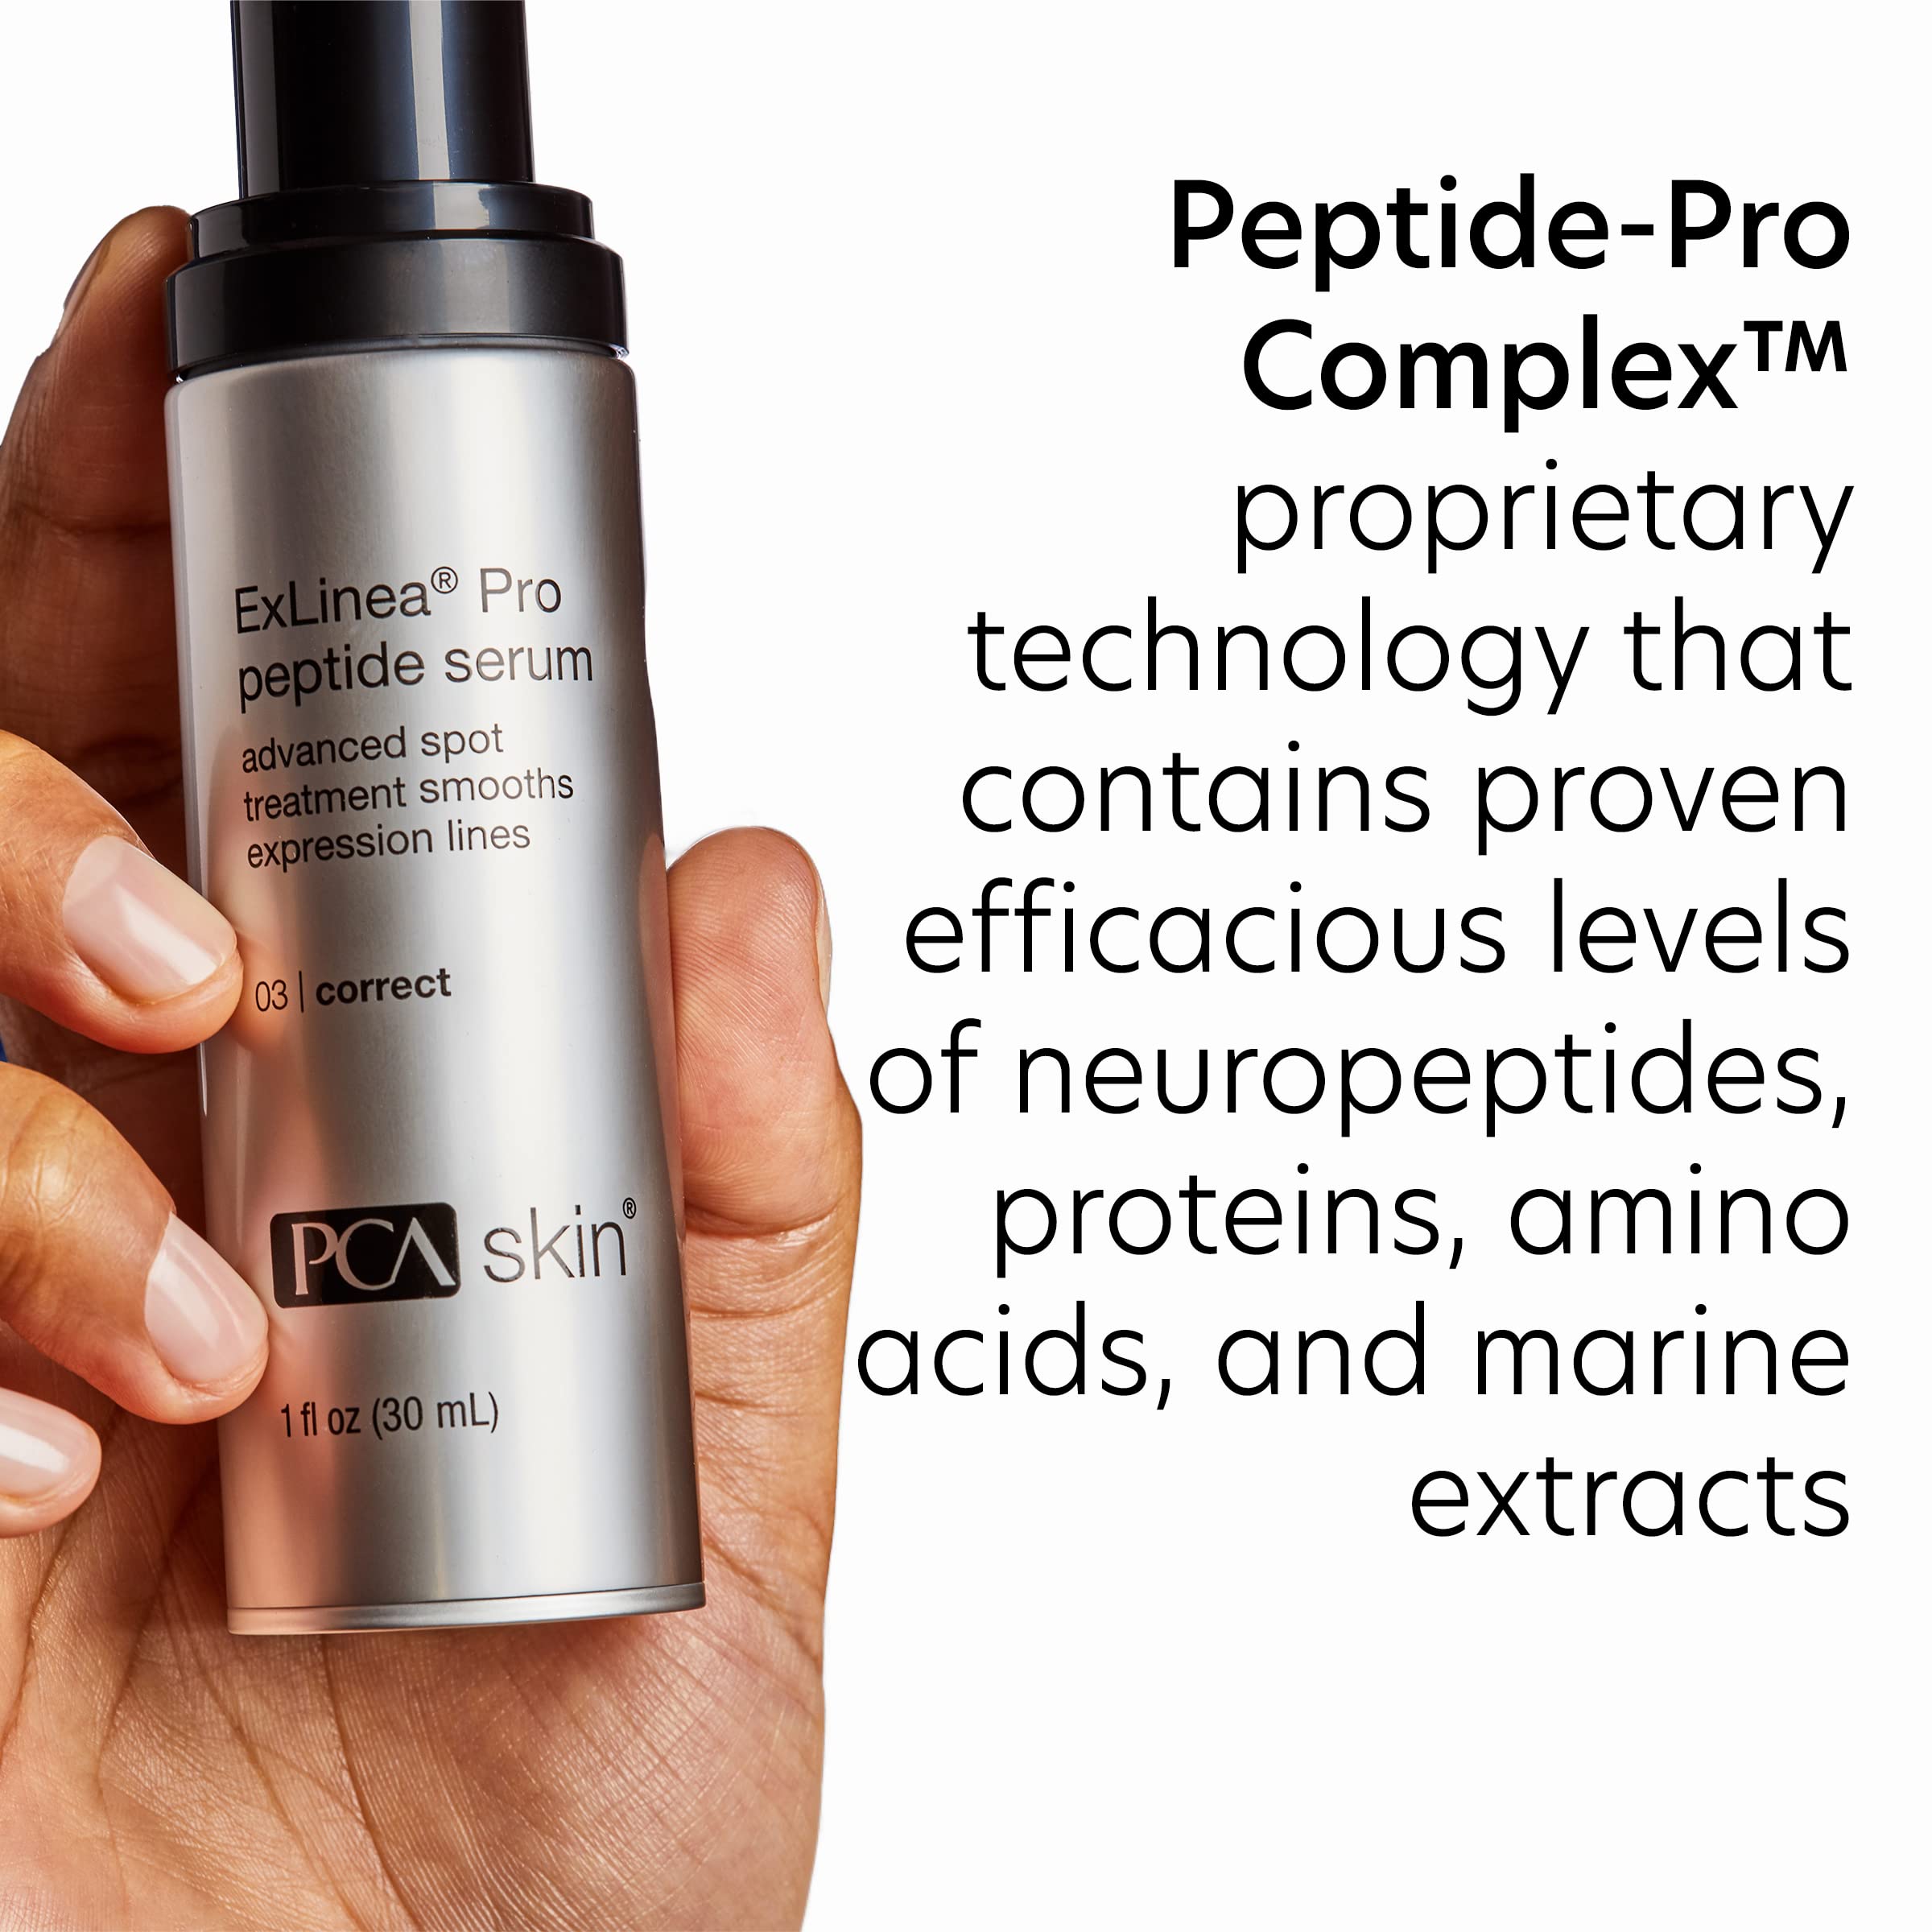 PCA SKIN ExLinea Pro Peptide Face Serum for Women, Spot Treatment Anti Aging Serum for Fine Lines and Wrinkles, Helps Lift, Tighten, and Firm the Skin and Reduces Wrinkle Depths, 1.0 oz Pump